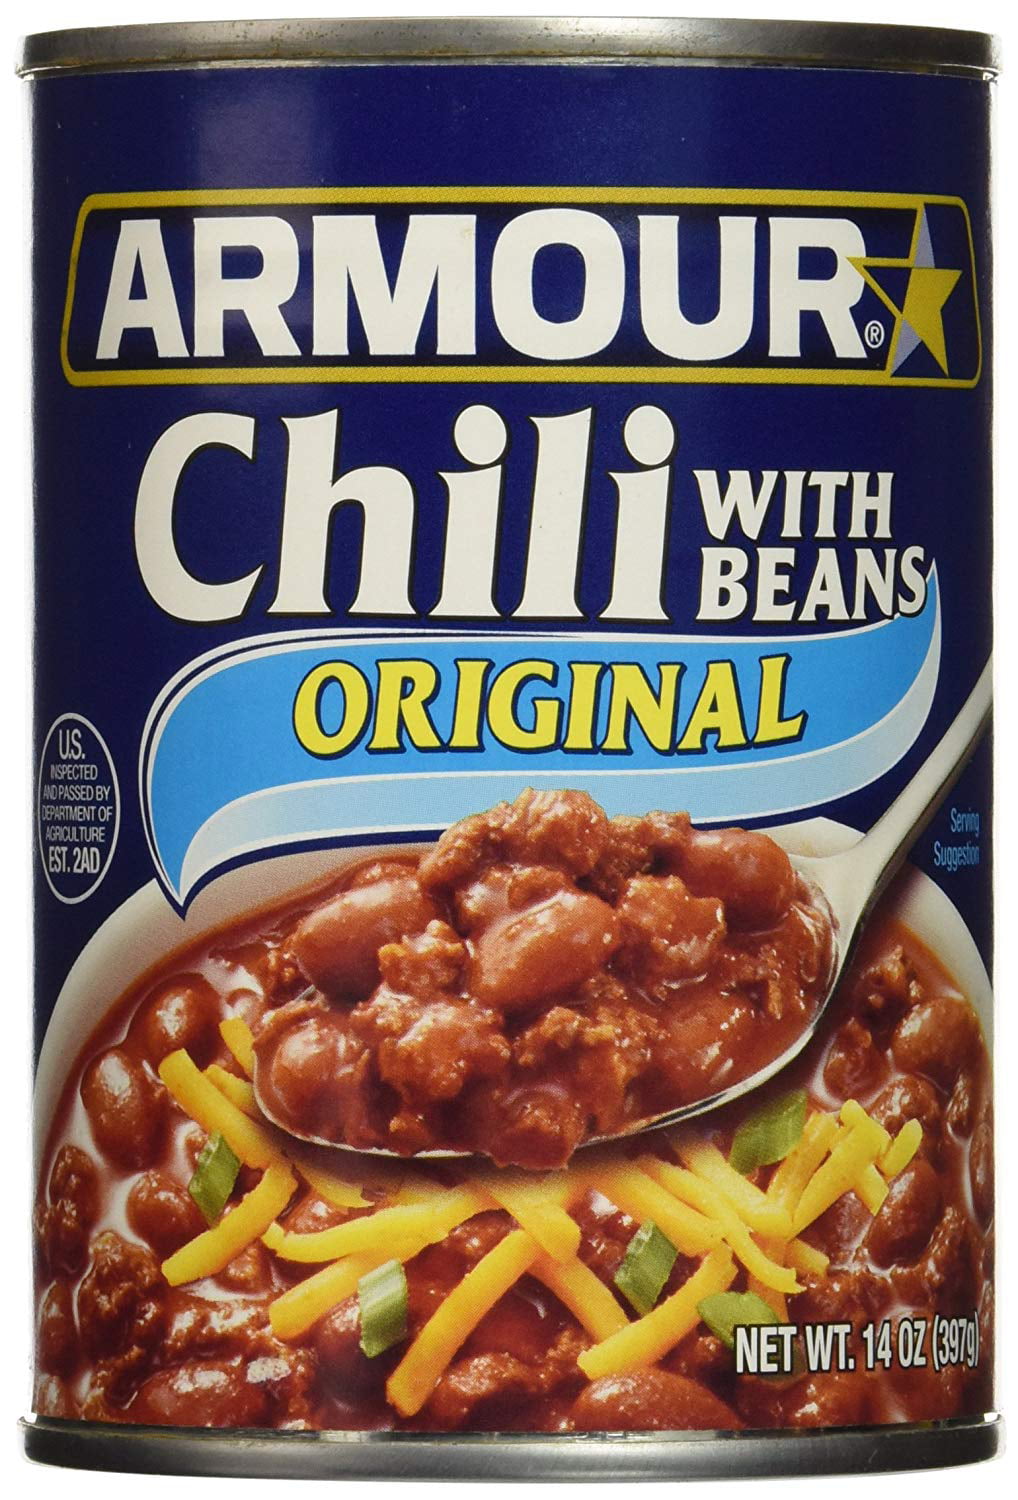 Armour Star Chili With Beans, 14 oz. (Pack of 12)